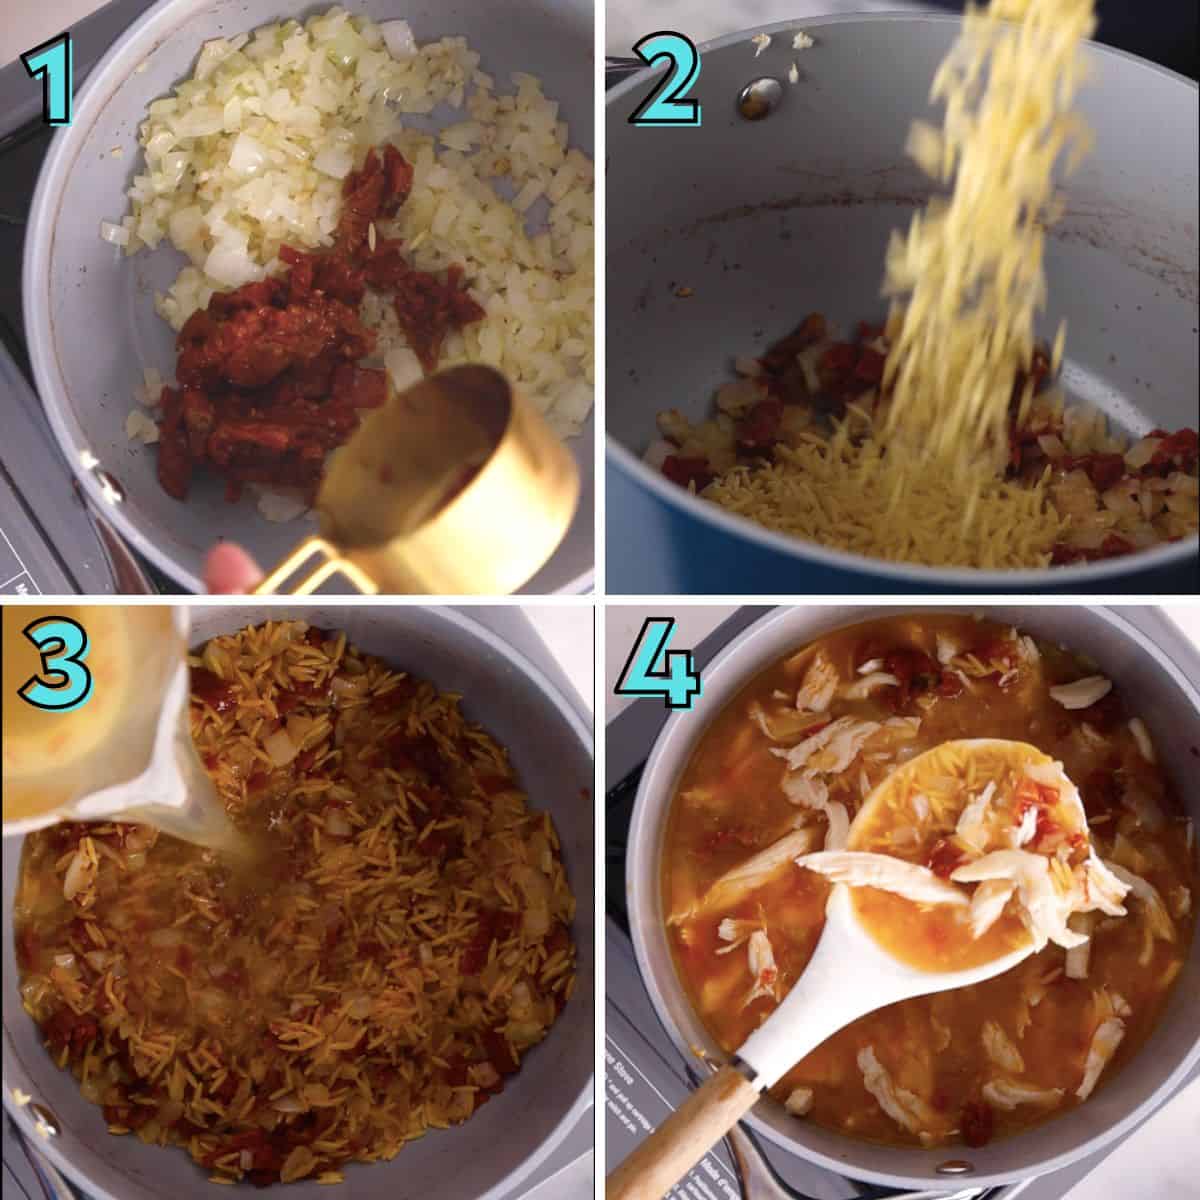 Step by step recipe instructions, in a collage.